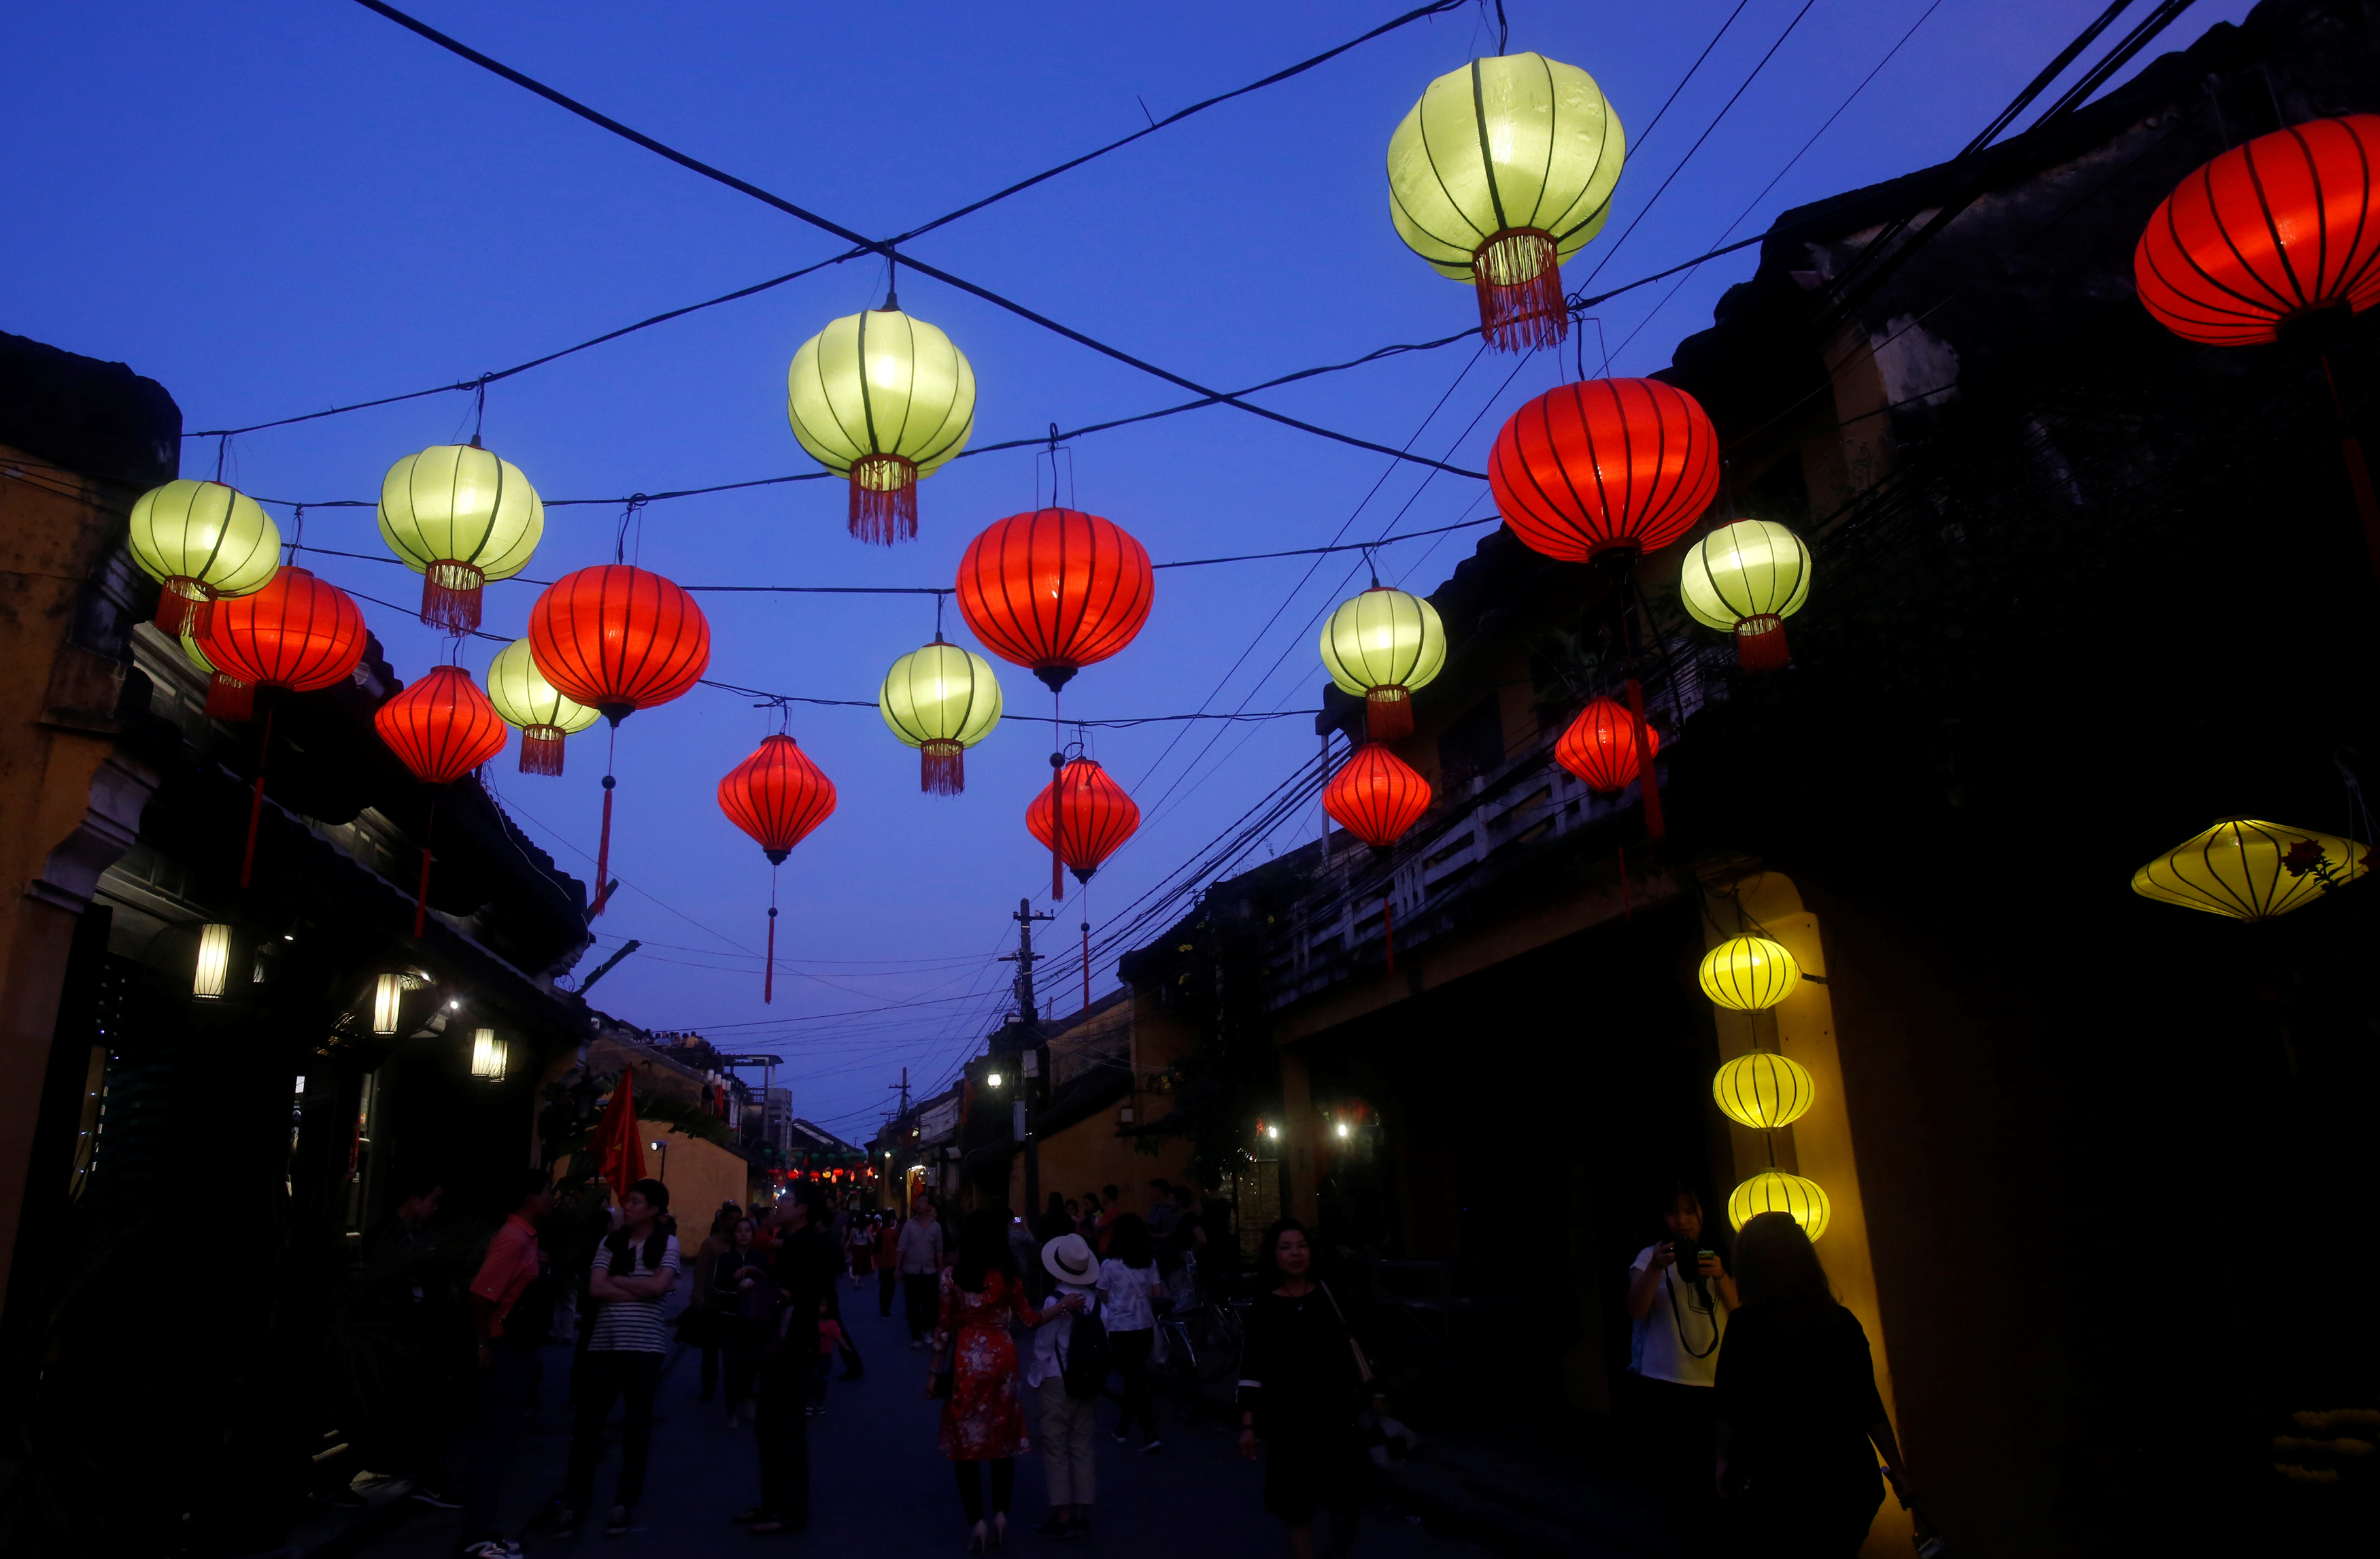 Tourists visit heritage town of Hoi An during Vietnamese lunar new year celebrations